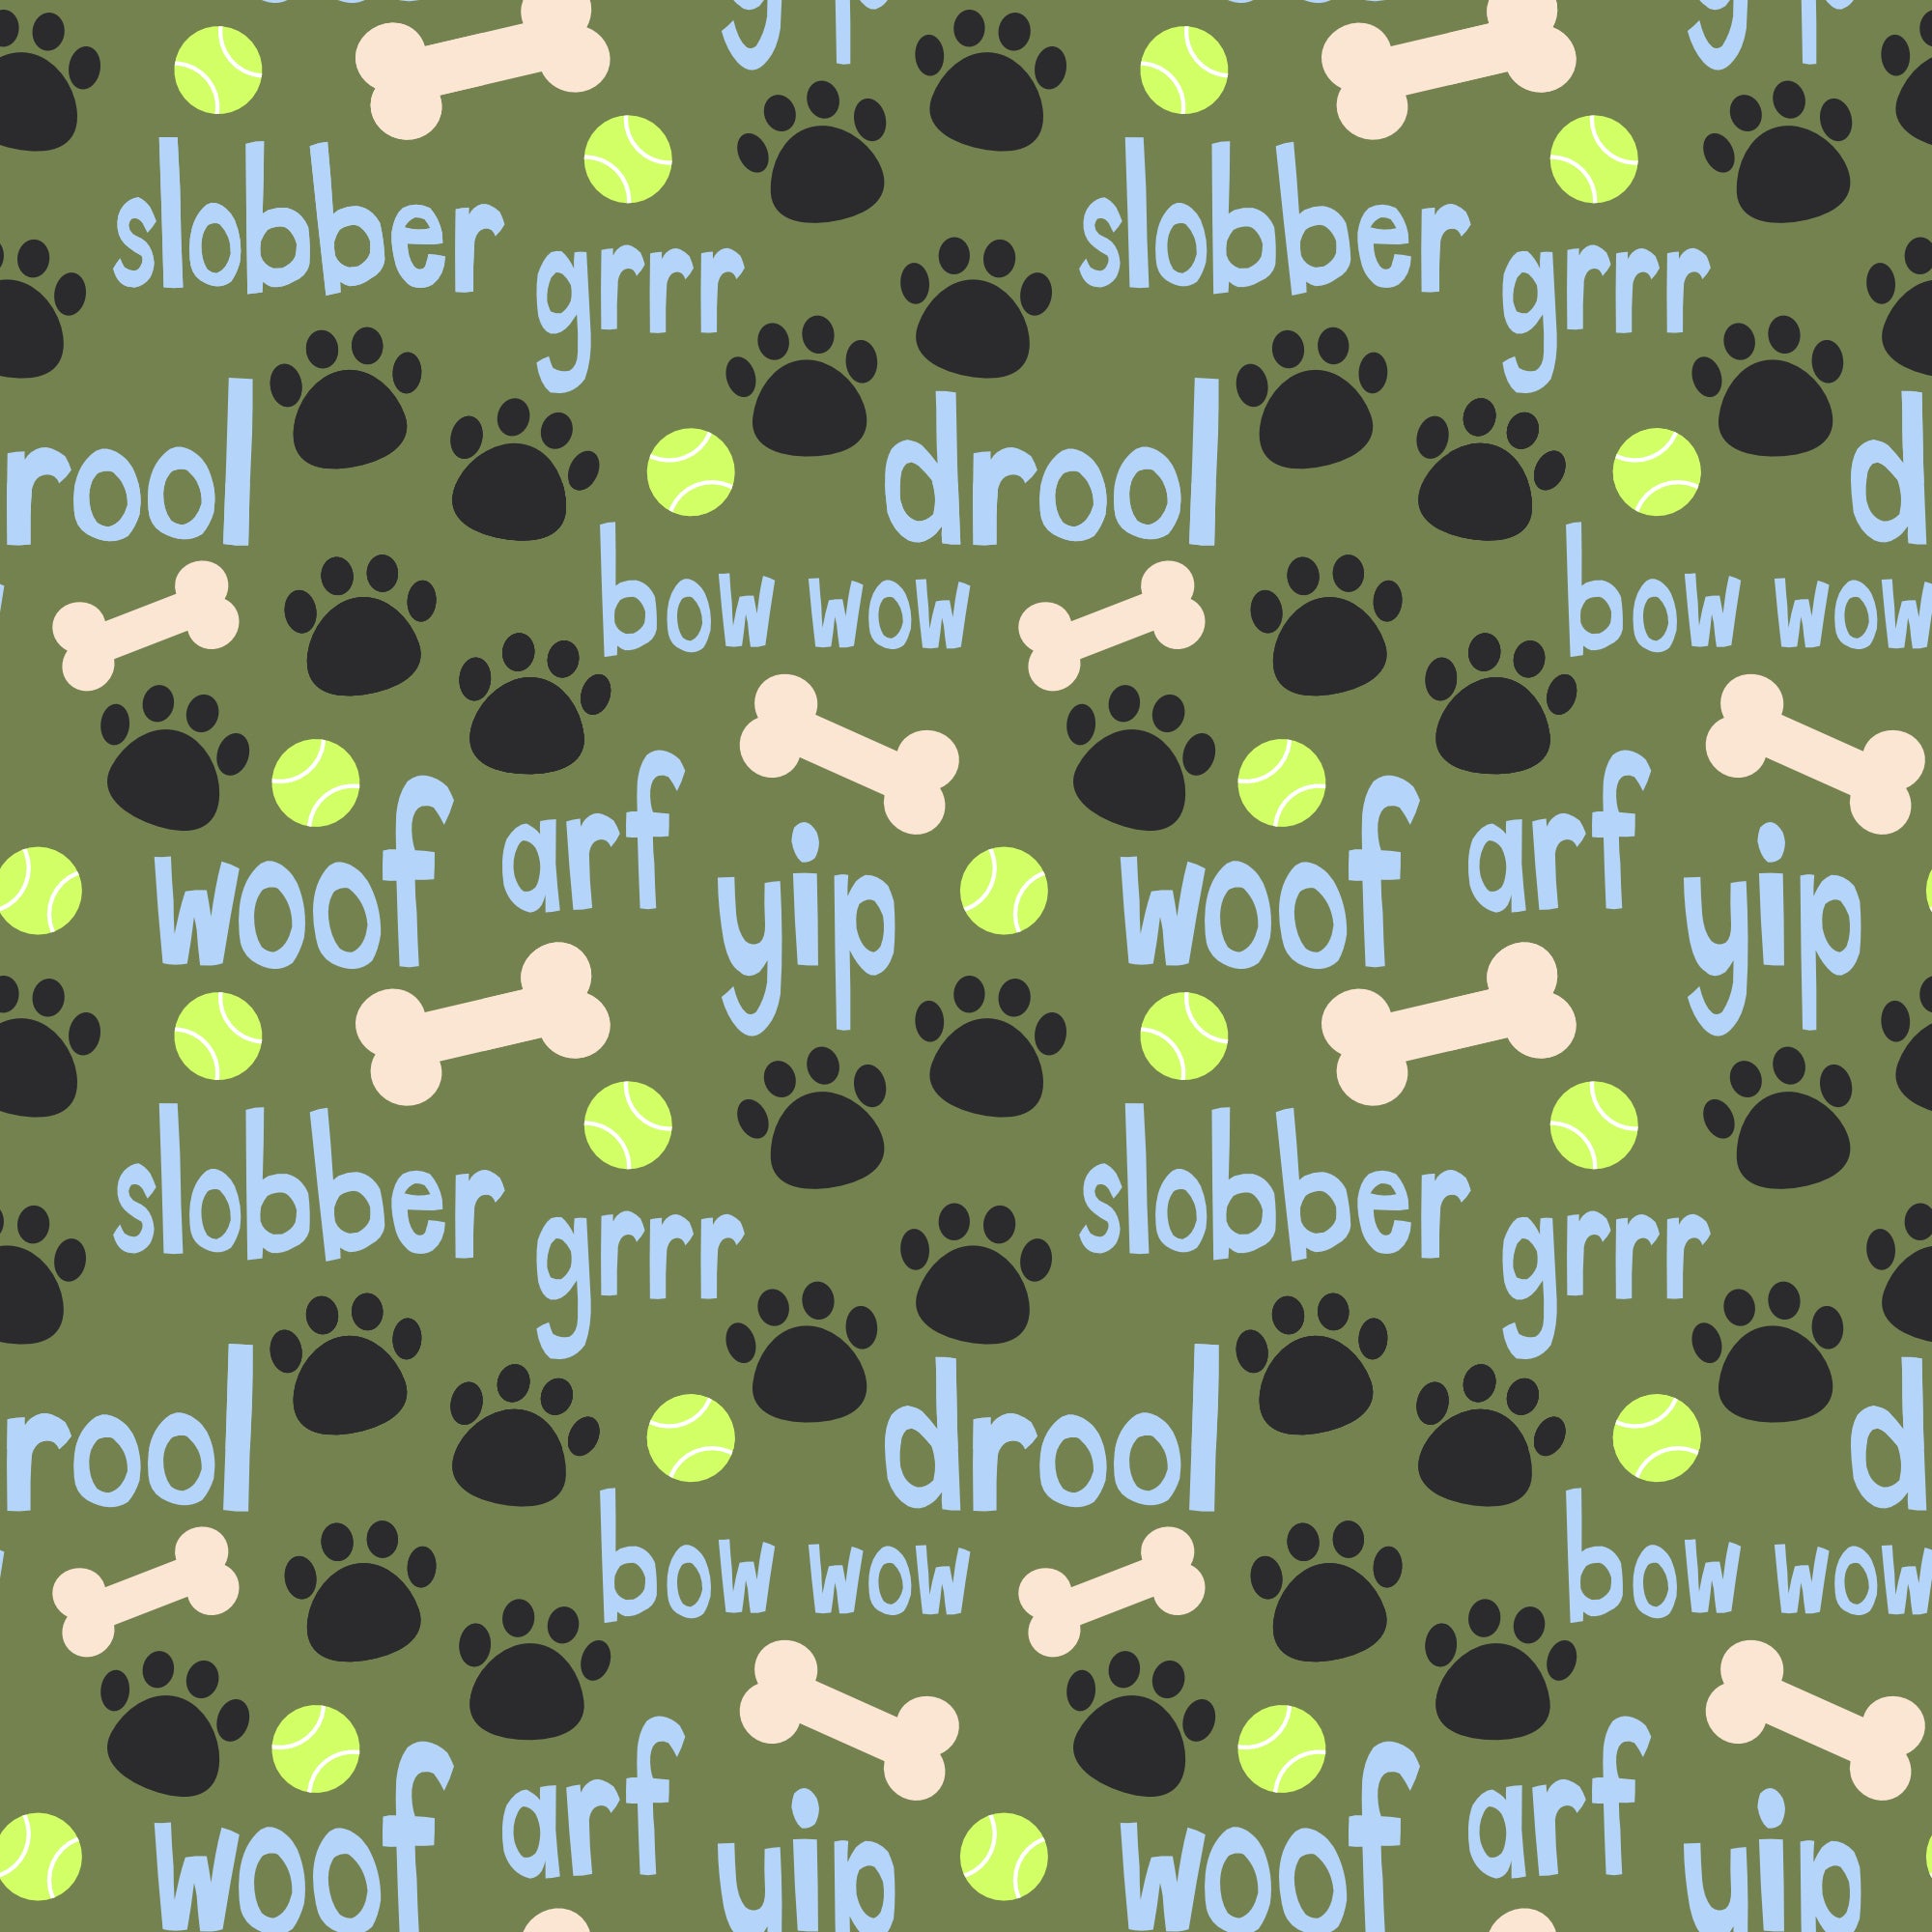 Good Dog - Puddle and Grass - Fabric Collection